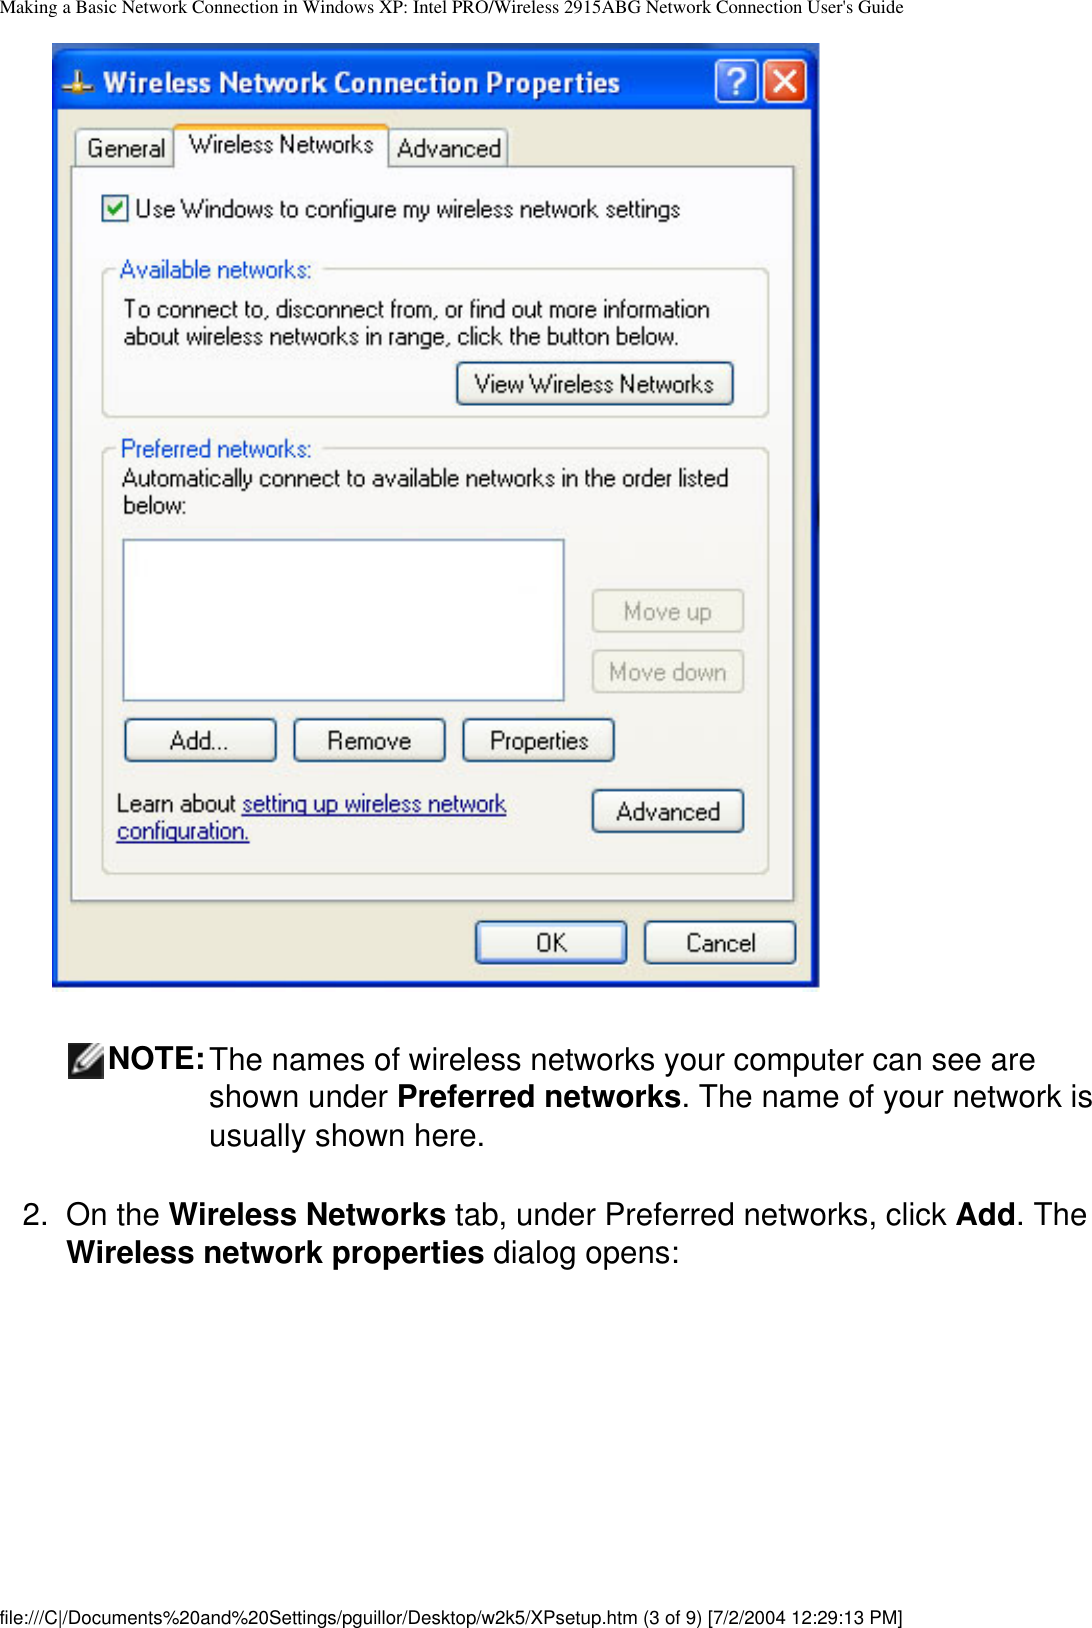 Making a Basic Network Connection in Windows XP: Intel PRO/Wireless 2915ABG Network Connection User&apos;s Guide        NOTE:The names of wireless networks your computer can see are shown under Preferred networks. The name of your network is usually shown here.2.  On the Wireless Networks tab, under Preferred networks, click Add. The Wireless network properties dialog opens:file:///C|/Documents%20and%20Settings/pguillor/Desktop/w2k5/XPsetup.htm (3 of 9) [7/2/2004 12:29:13 PM]